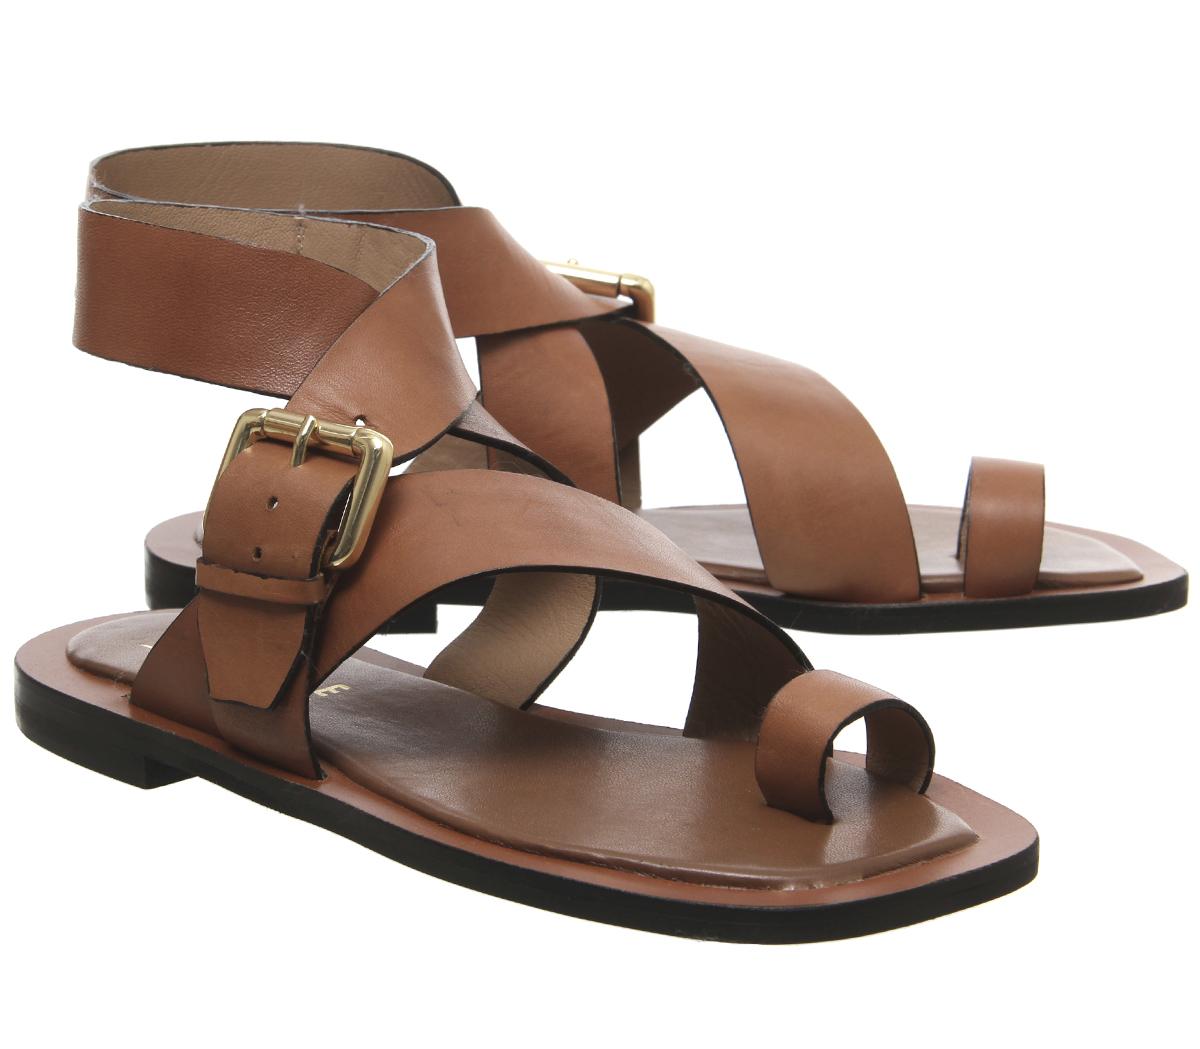 Office Serenity Sandals Tan Leather - Women’s Sandals